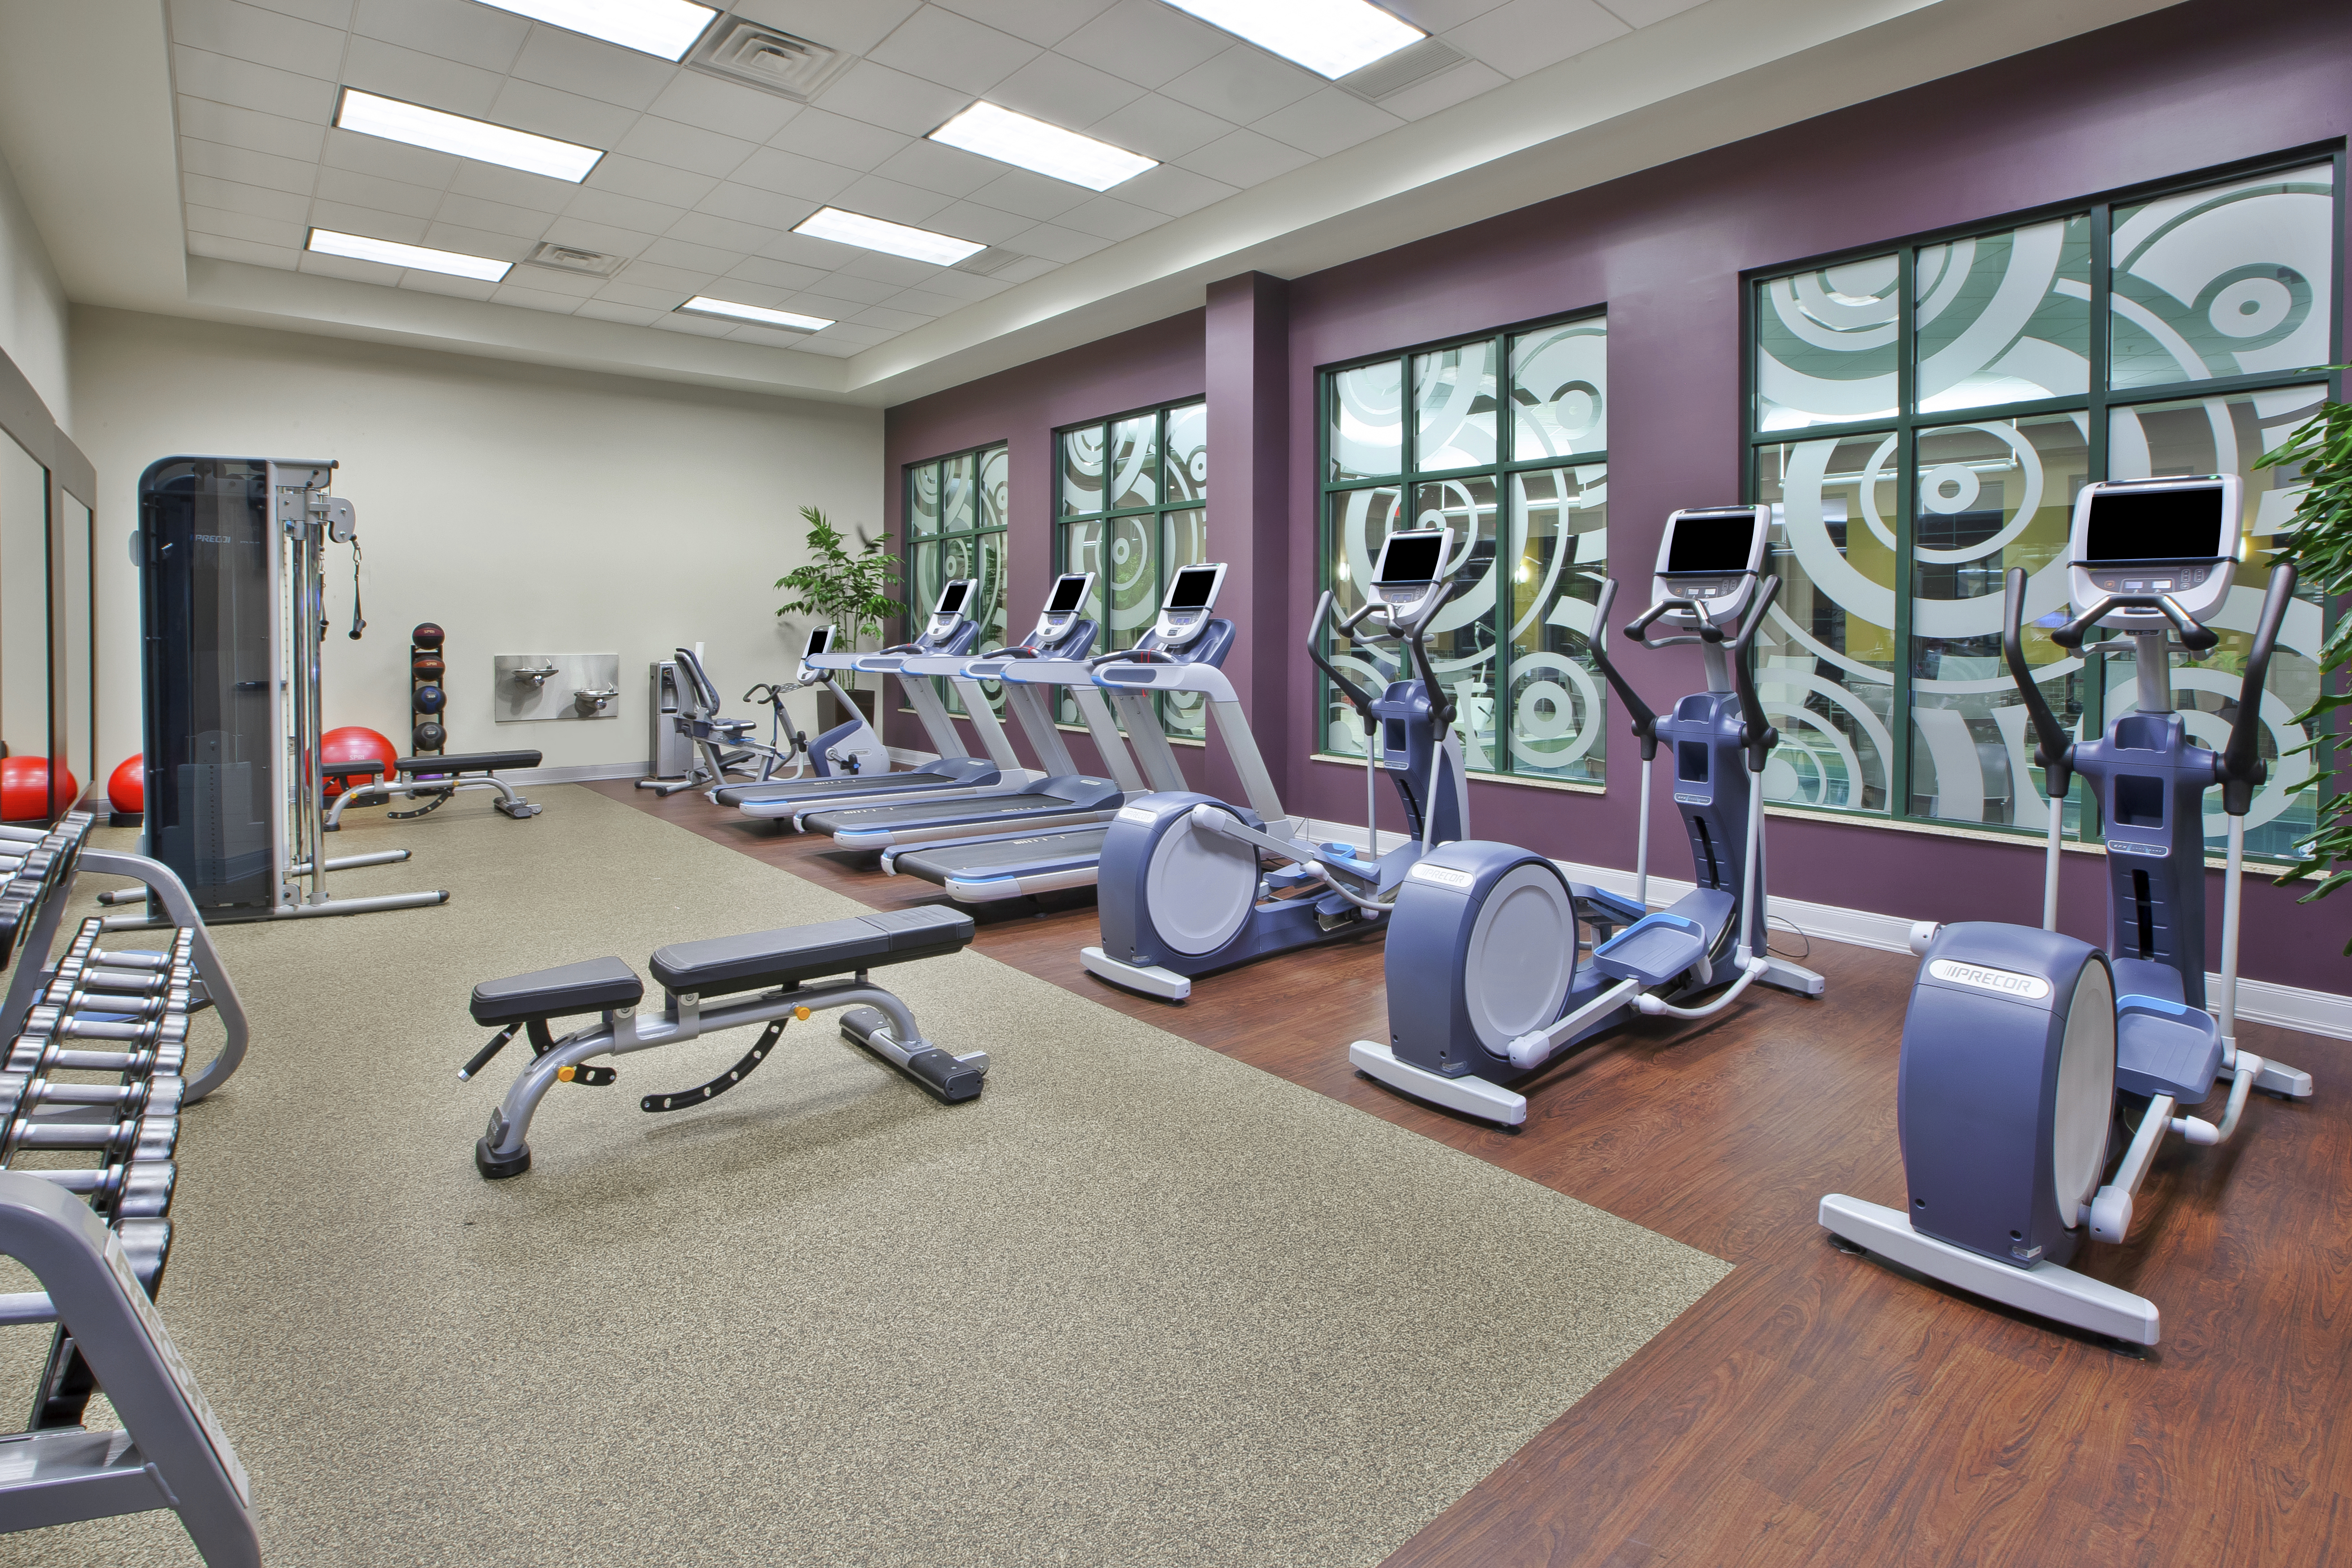 Fitness Center With Cardio Equipment Facing Large Windows, Weight Bench, Free Weights, Weight Machine, Red Stability Balls, and Weight Balls